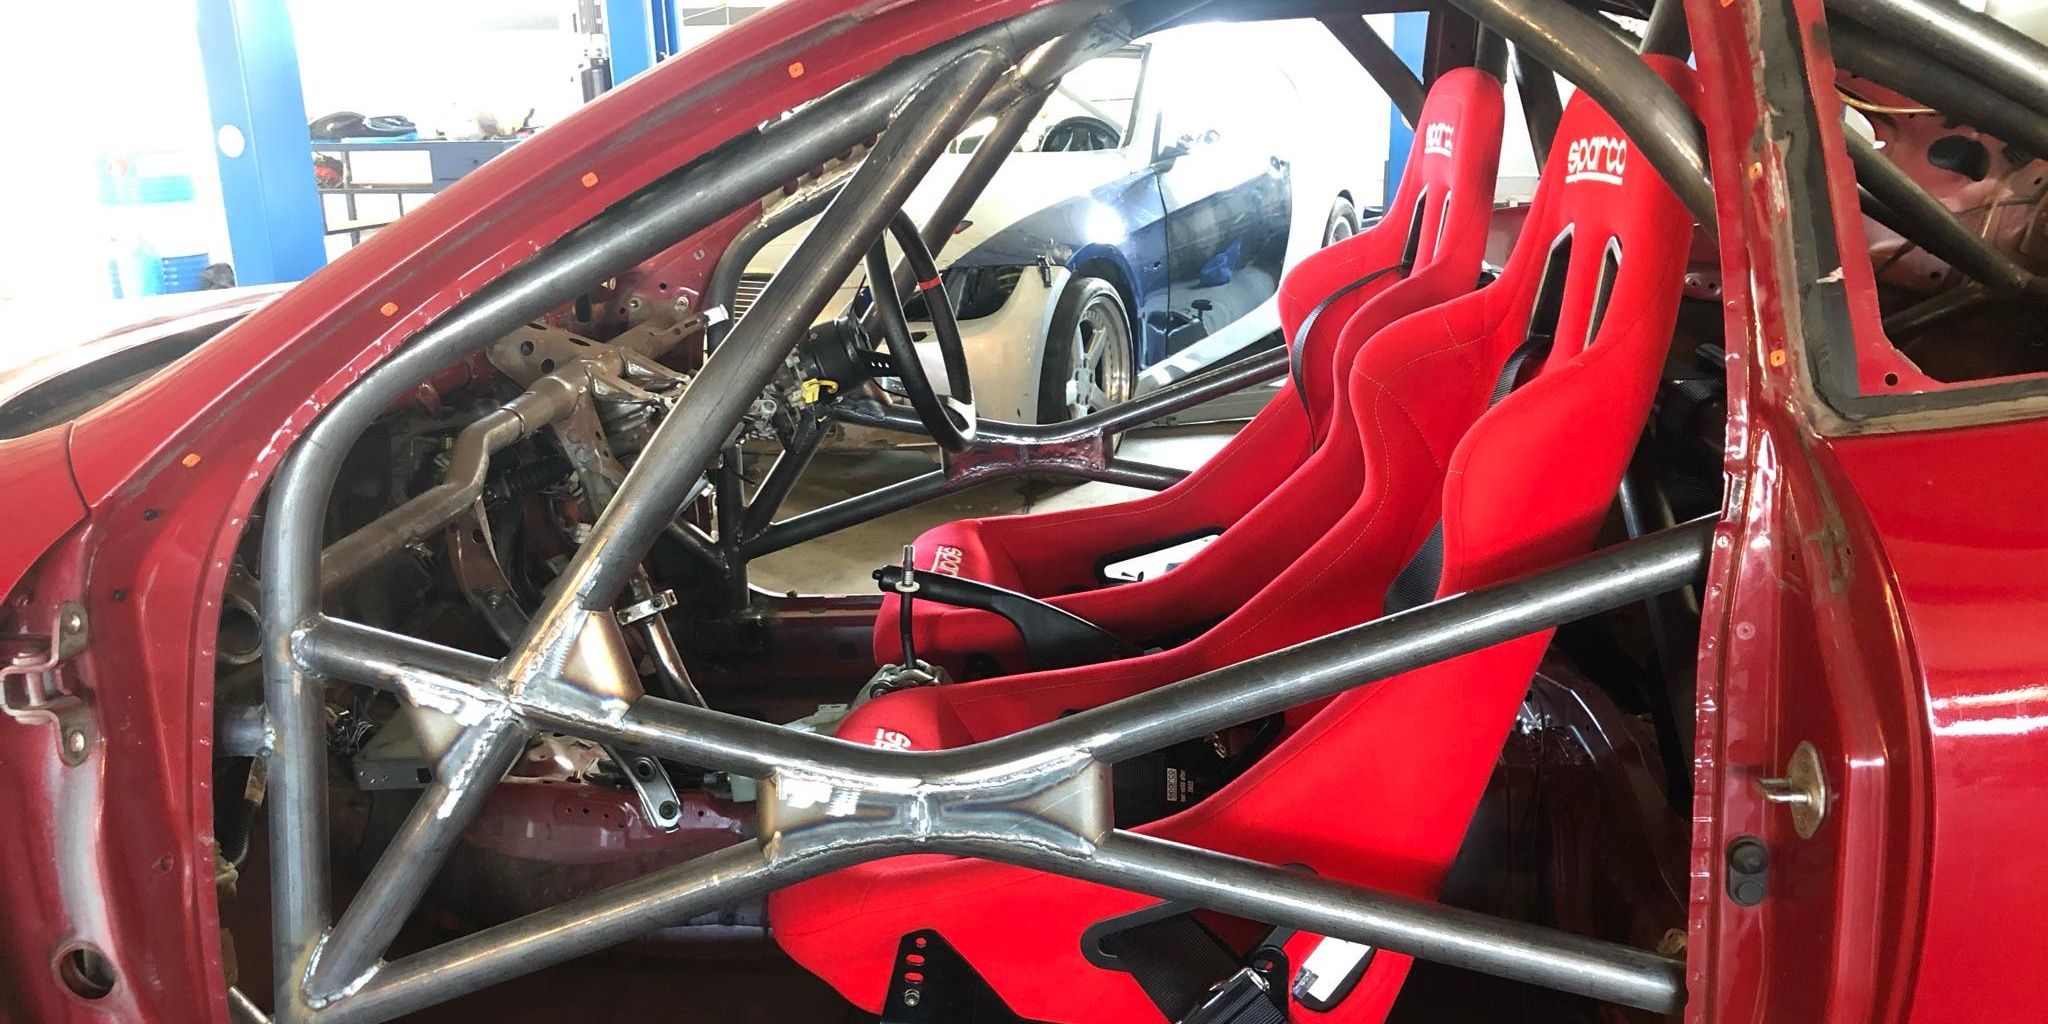 Toyota Celica Roll Cage